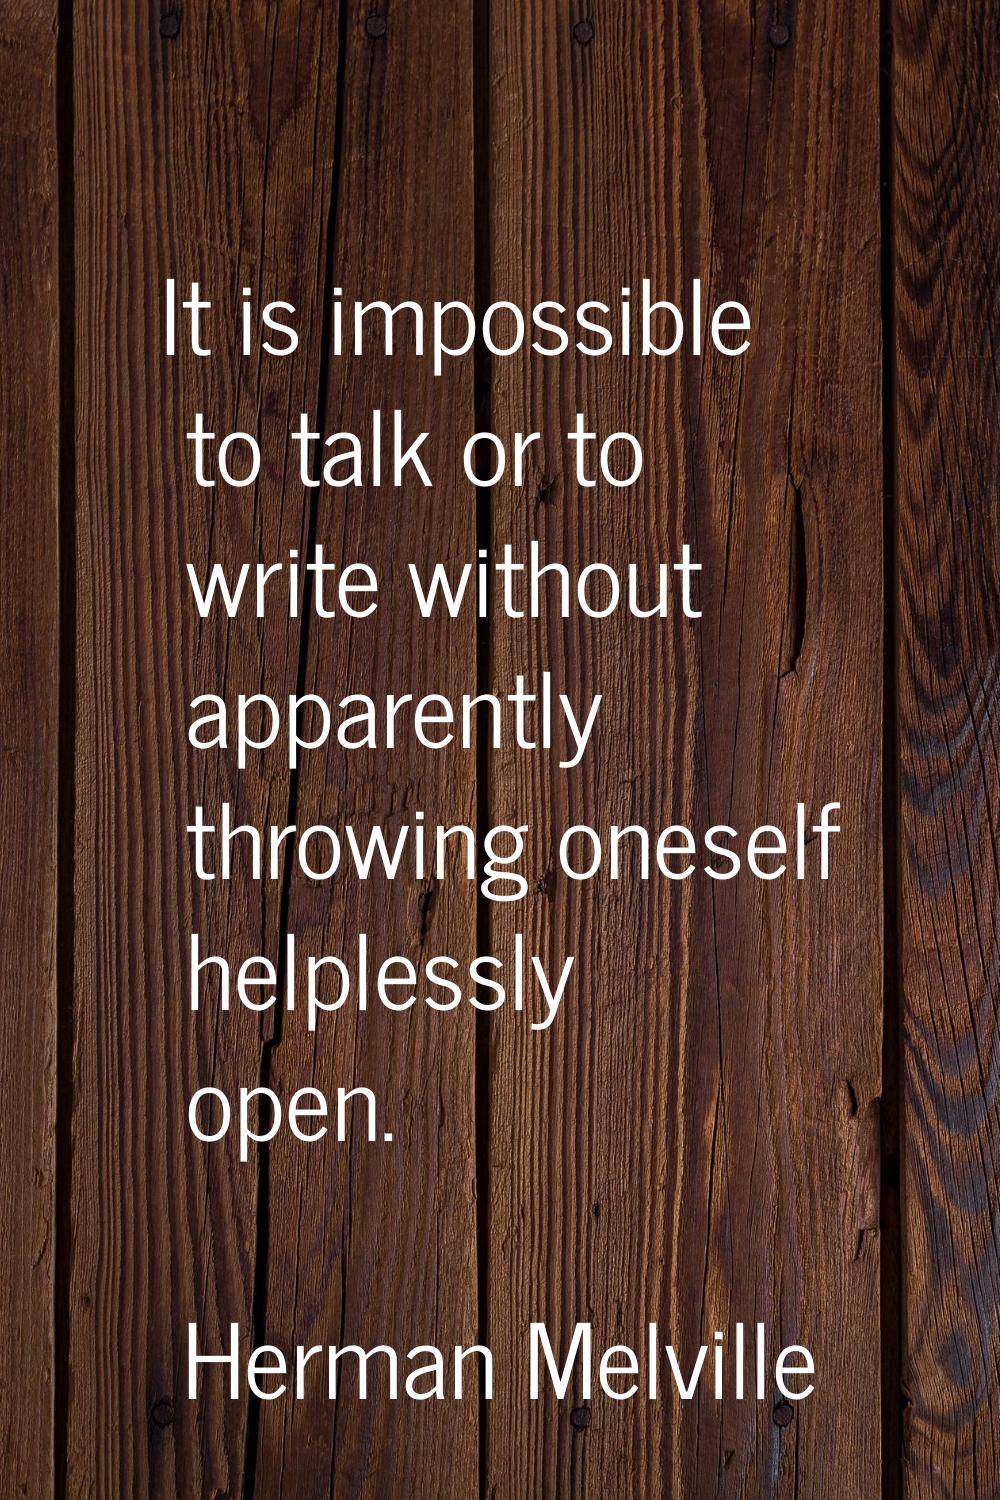 It is impossible to talk or to write without apparently throwing oneself helplessly open.